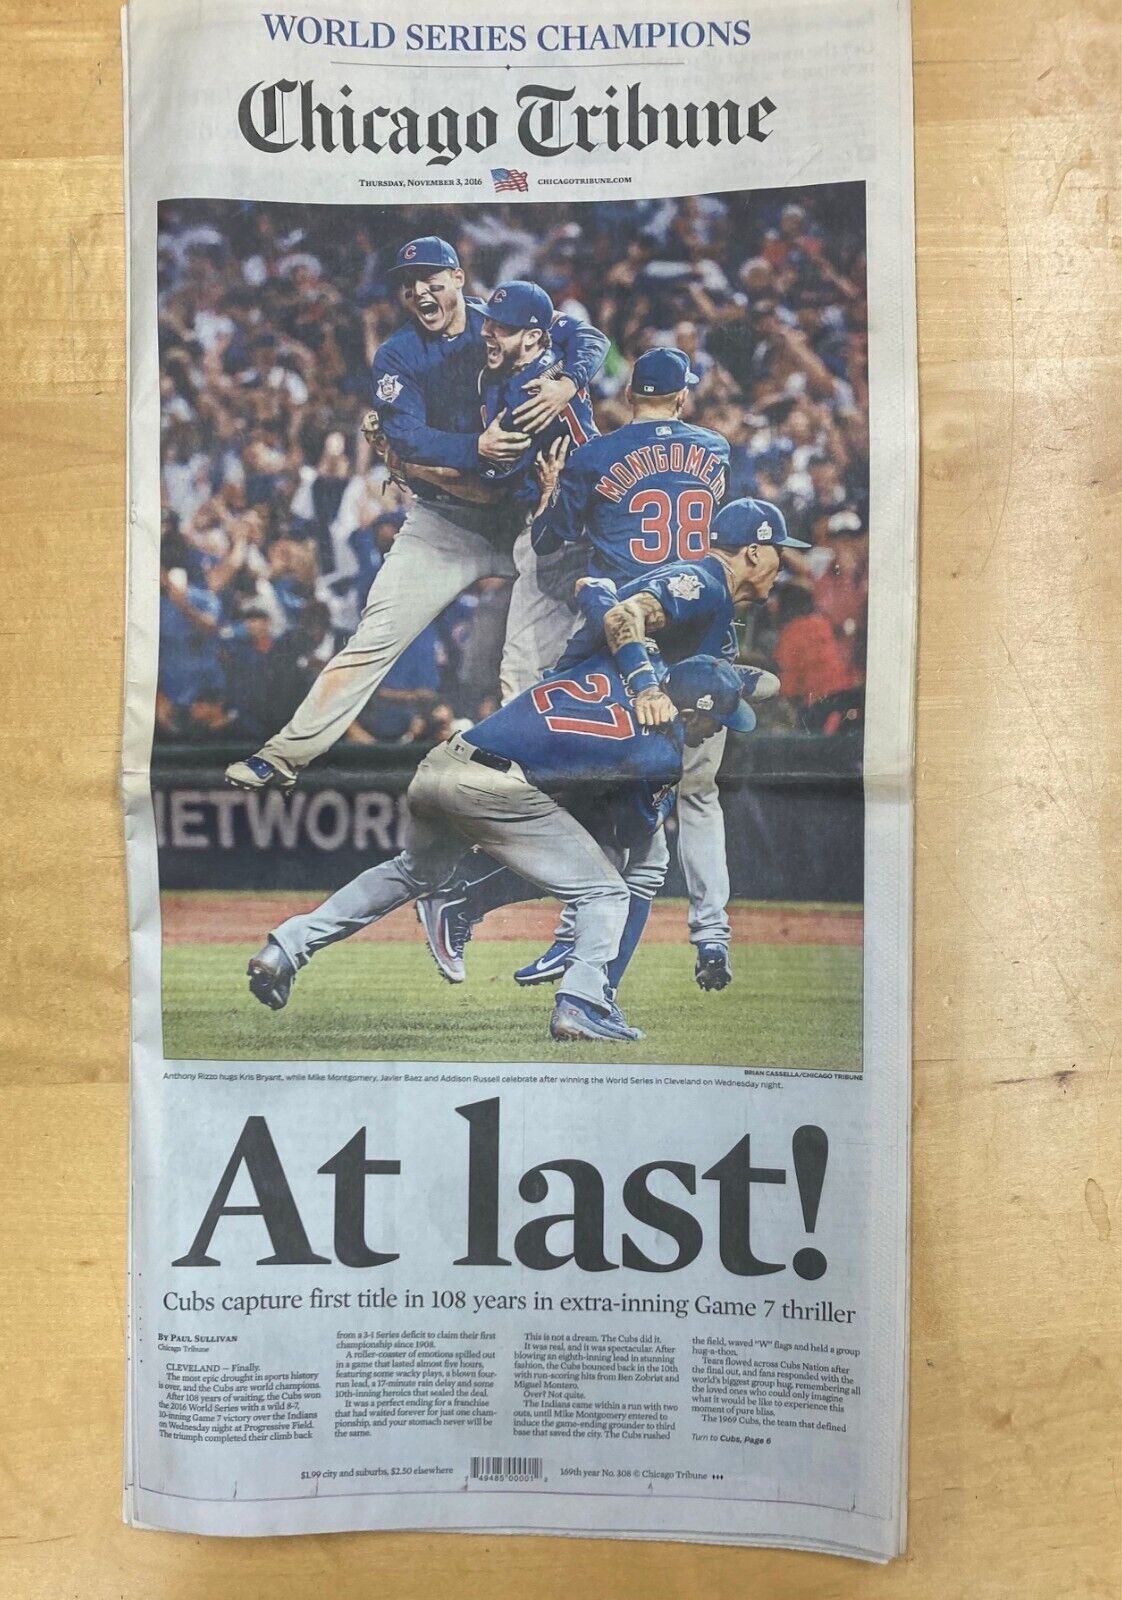 CHICAGO TRIBUNE NOVEMBER 3, 2016 CHICAGO CUBS WIN WORLD SERIES GOOD CONDITION